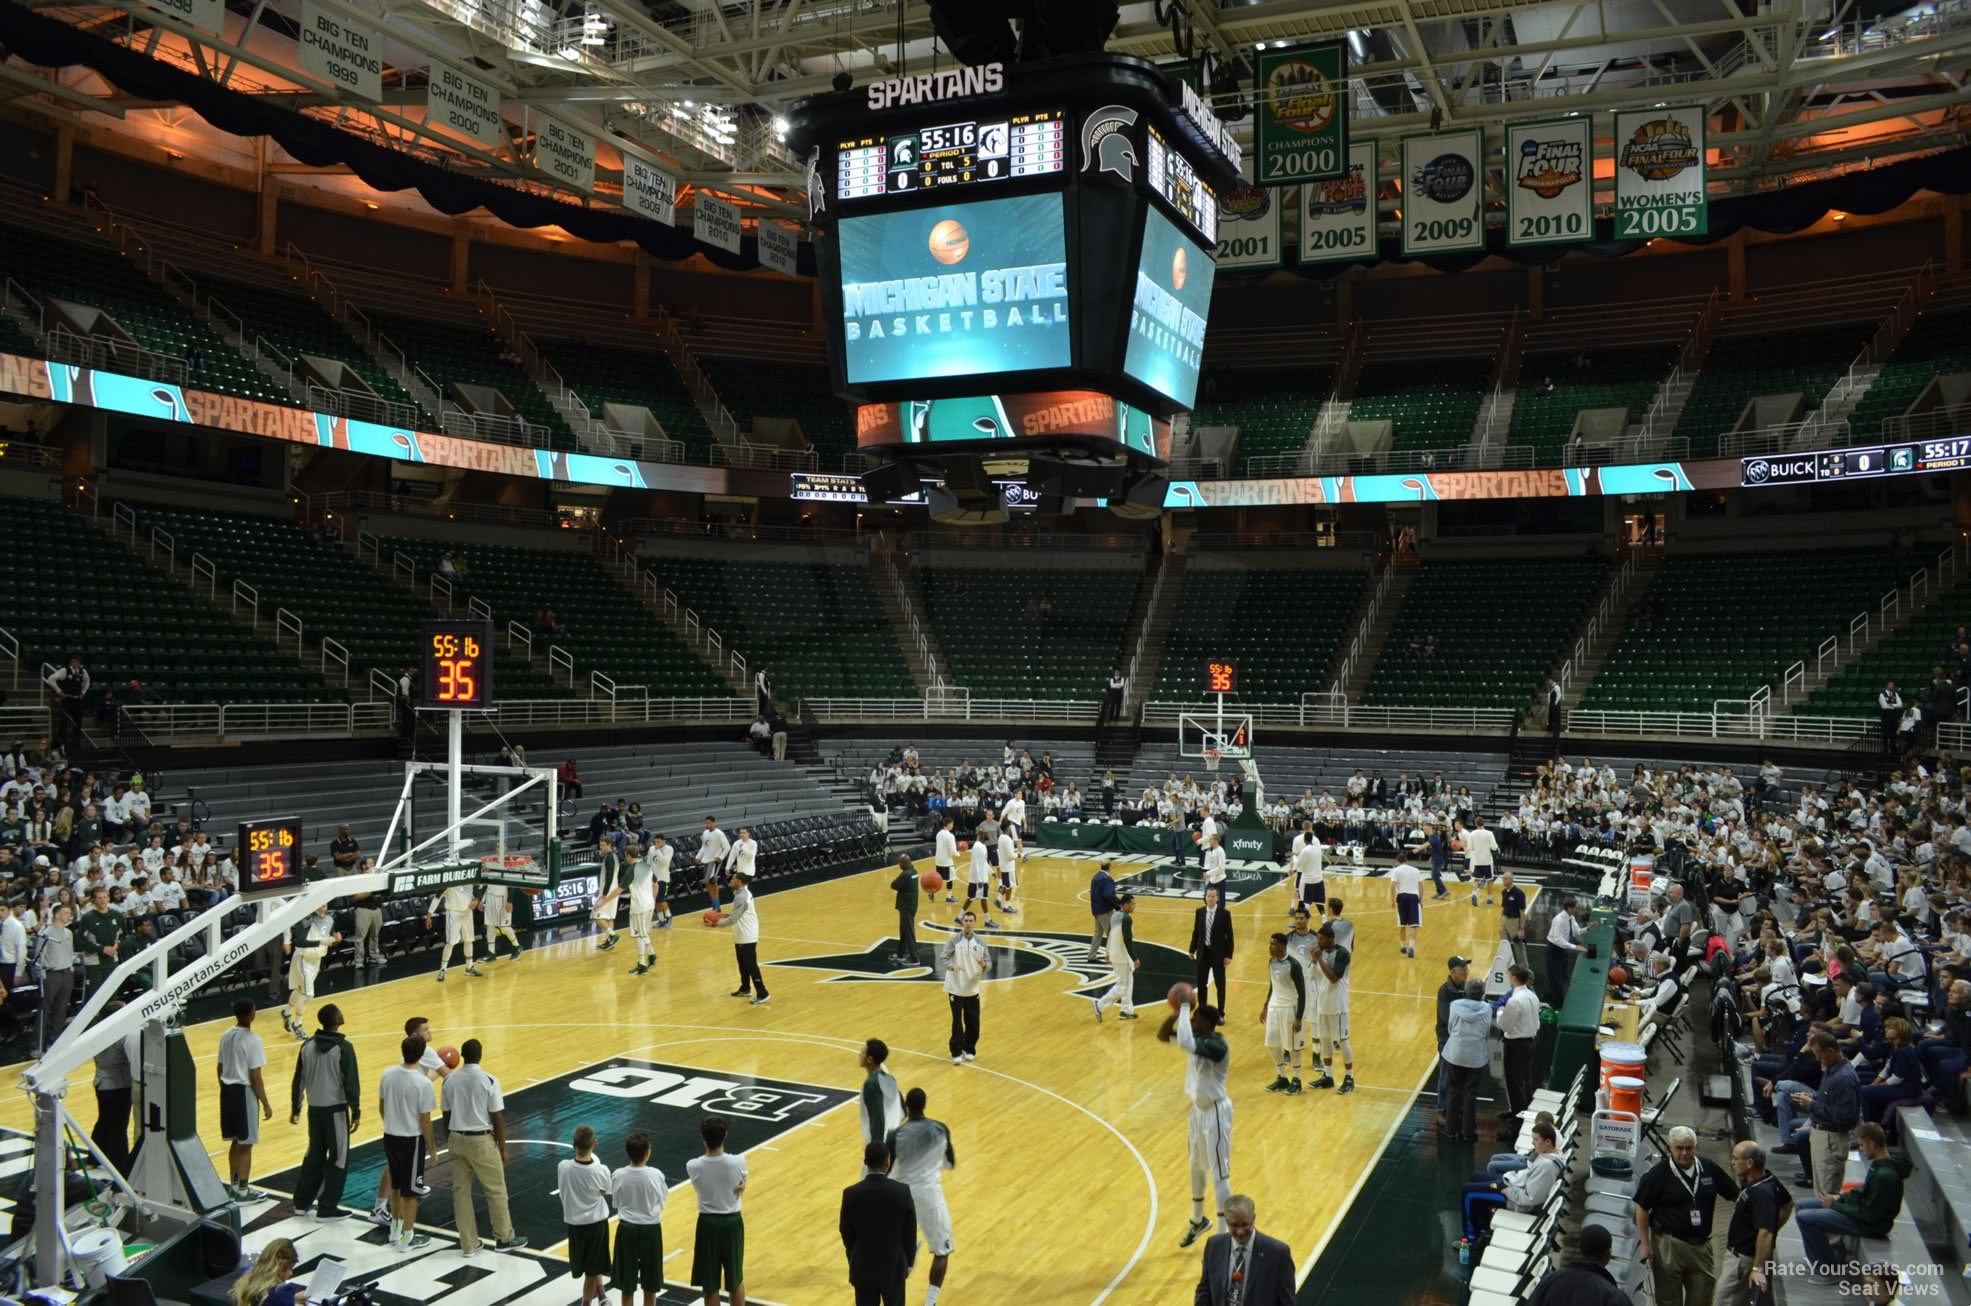 section 117, row 13 seat view  - breslin center